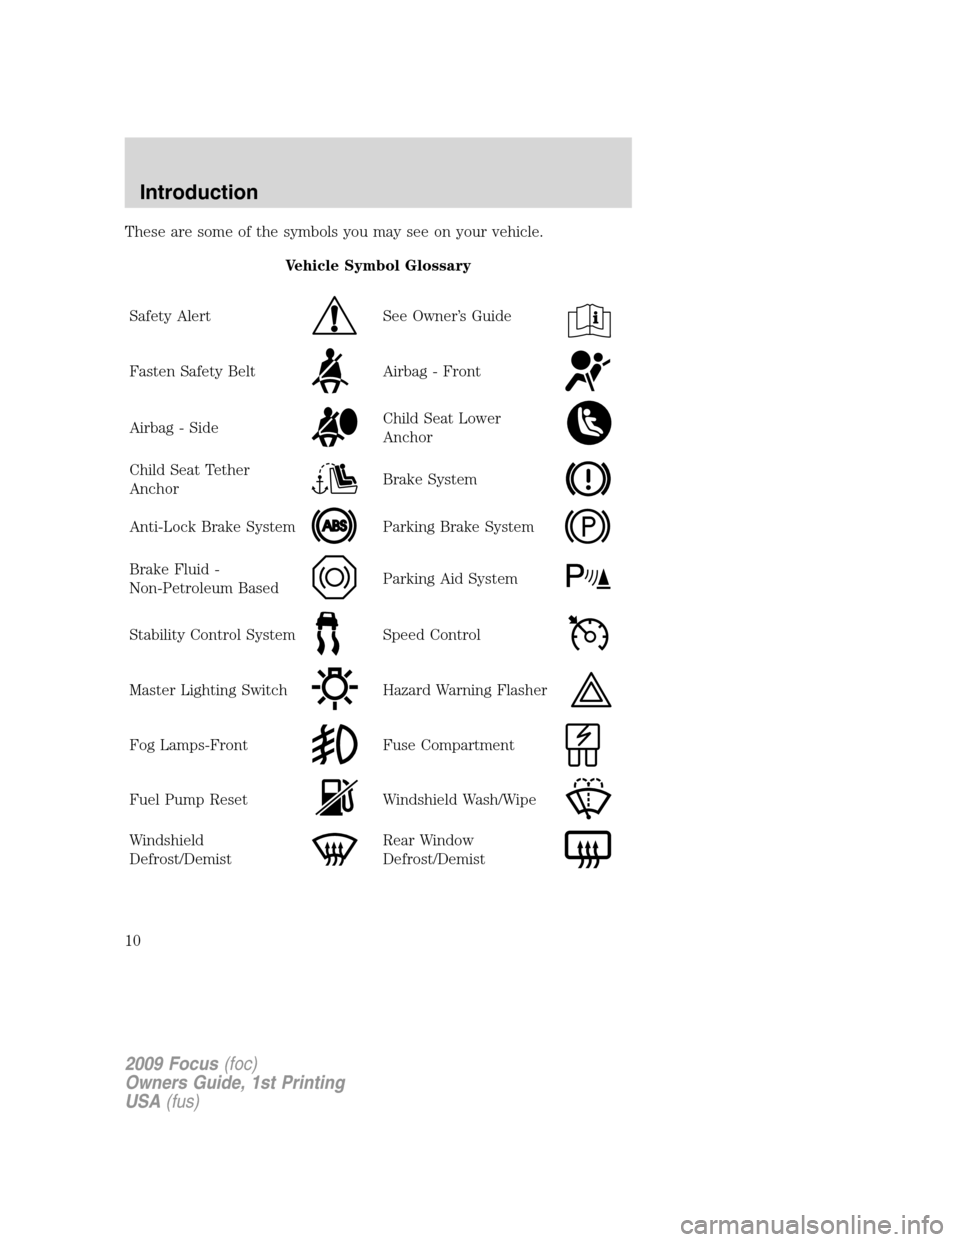 FORD FOCUS 2009 2.G Owners Manual These are some of the symbols you may see on your vehicle.
Vehicle Symbol Glossary
Safety Alert
See Owner’s Guide
Fasten Safety BeltAirbag - Front
Airbag - SideChild Seat Lower
Anchor
Child Seat Tet